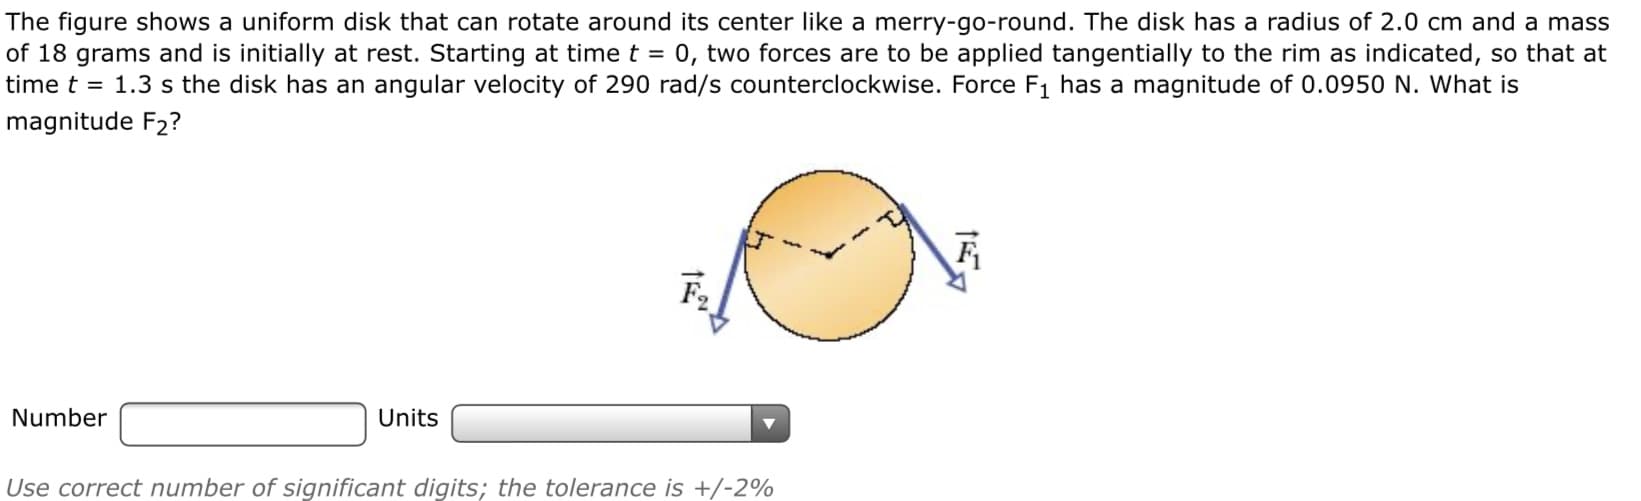 The figure shows a uniform disk that can rotate around its center like a merry-go-round. The disk has a radius of 2.0 cm and a mass
of 18 grams and is initially at rest. Starting at time t = 0, two forces are to be applied tangentially to the rim as indicated, so that at
time t = 1.3 s the disk has an angular velocity of 290 rad/s counterclockwise. Force F1 has a magnitude of 0.0950 N. What is
magnitude F2?
Number
Units
Use correct number of significant digits; the tolerance is +/-2%
